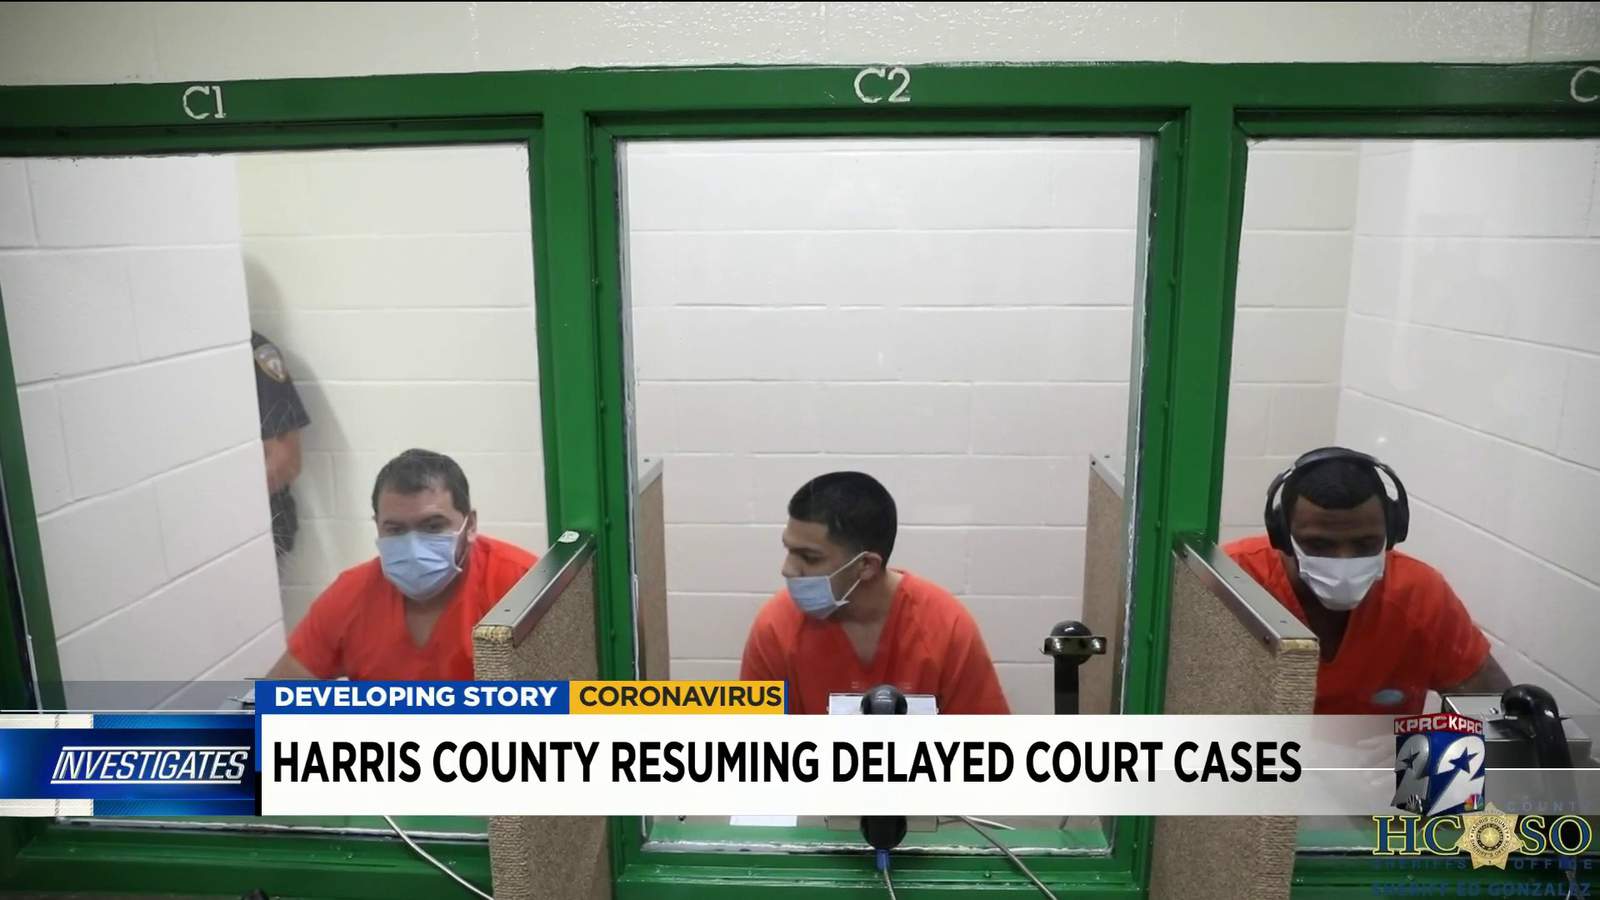 Harris County continues to grapple with a huge backlog of criminal cases